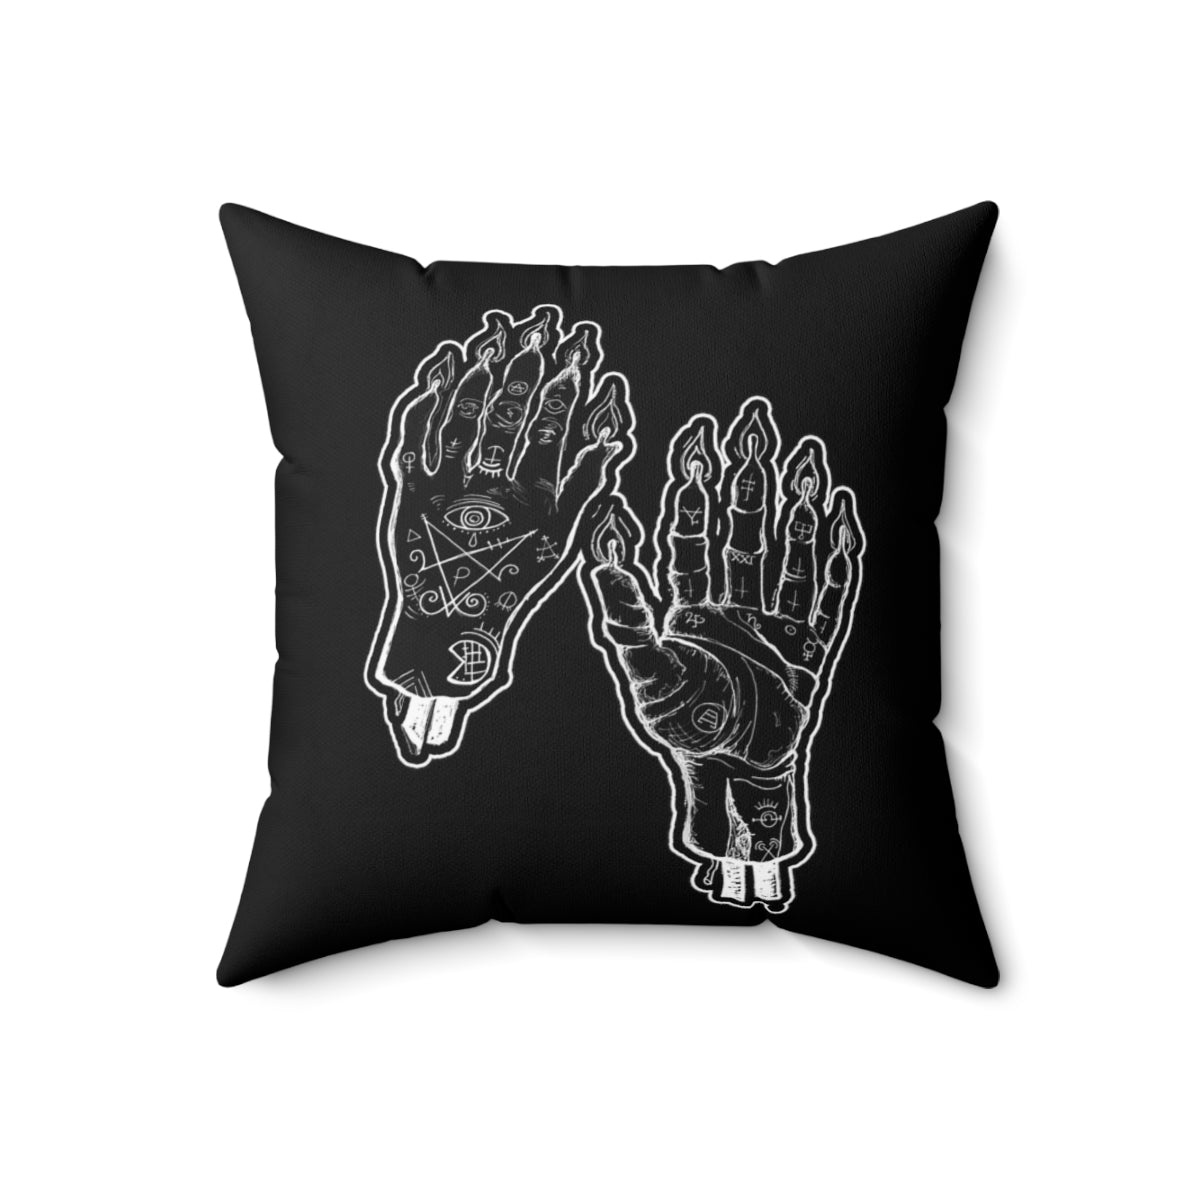 Hands of Glory Pillow